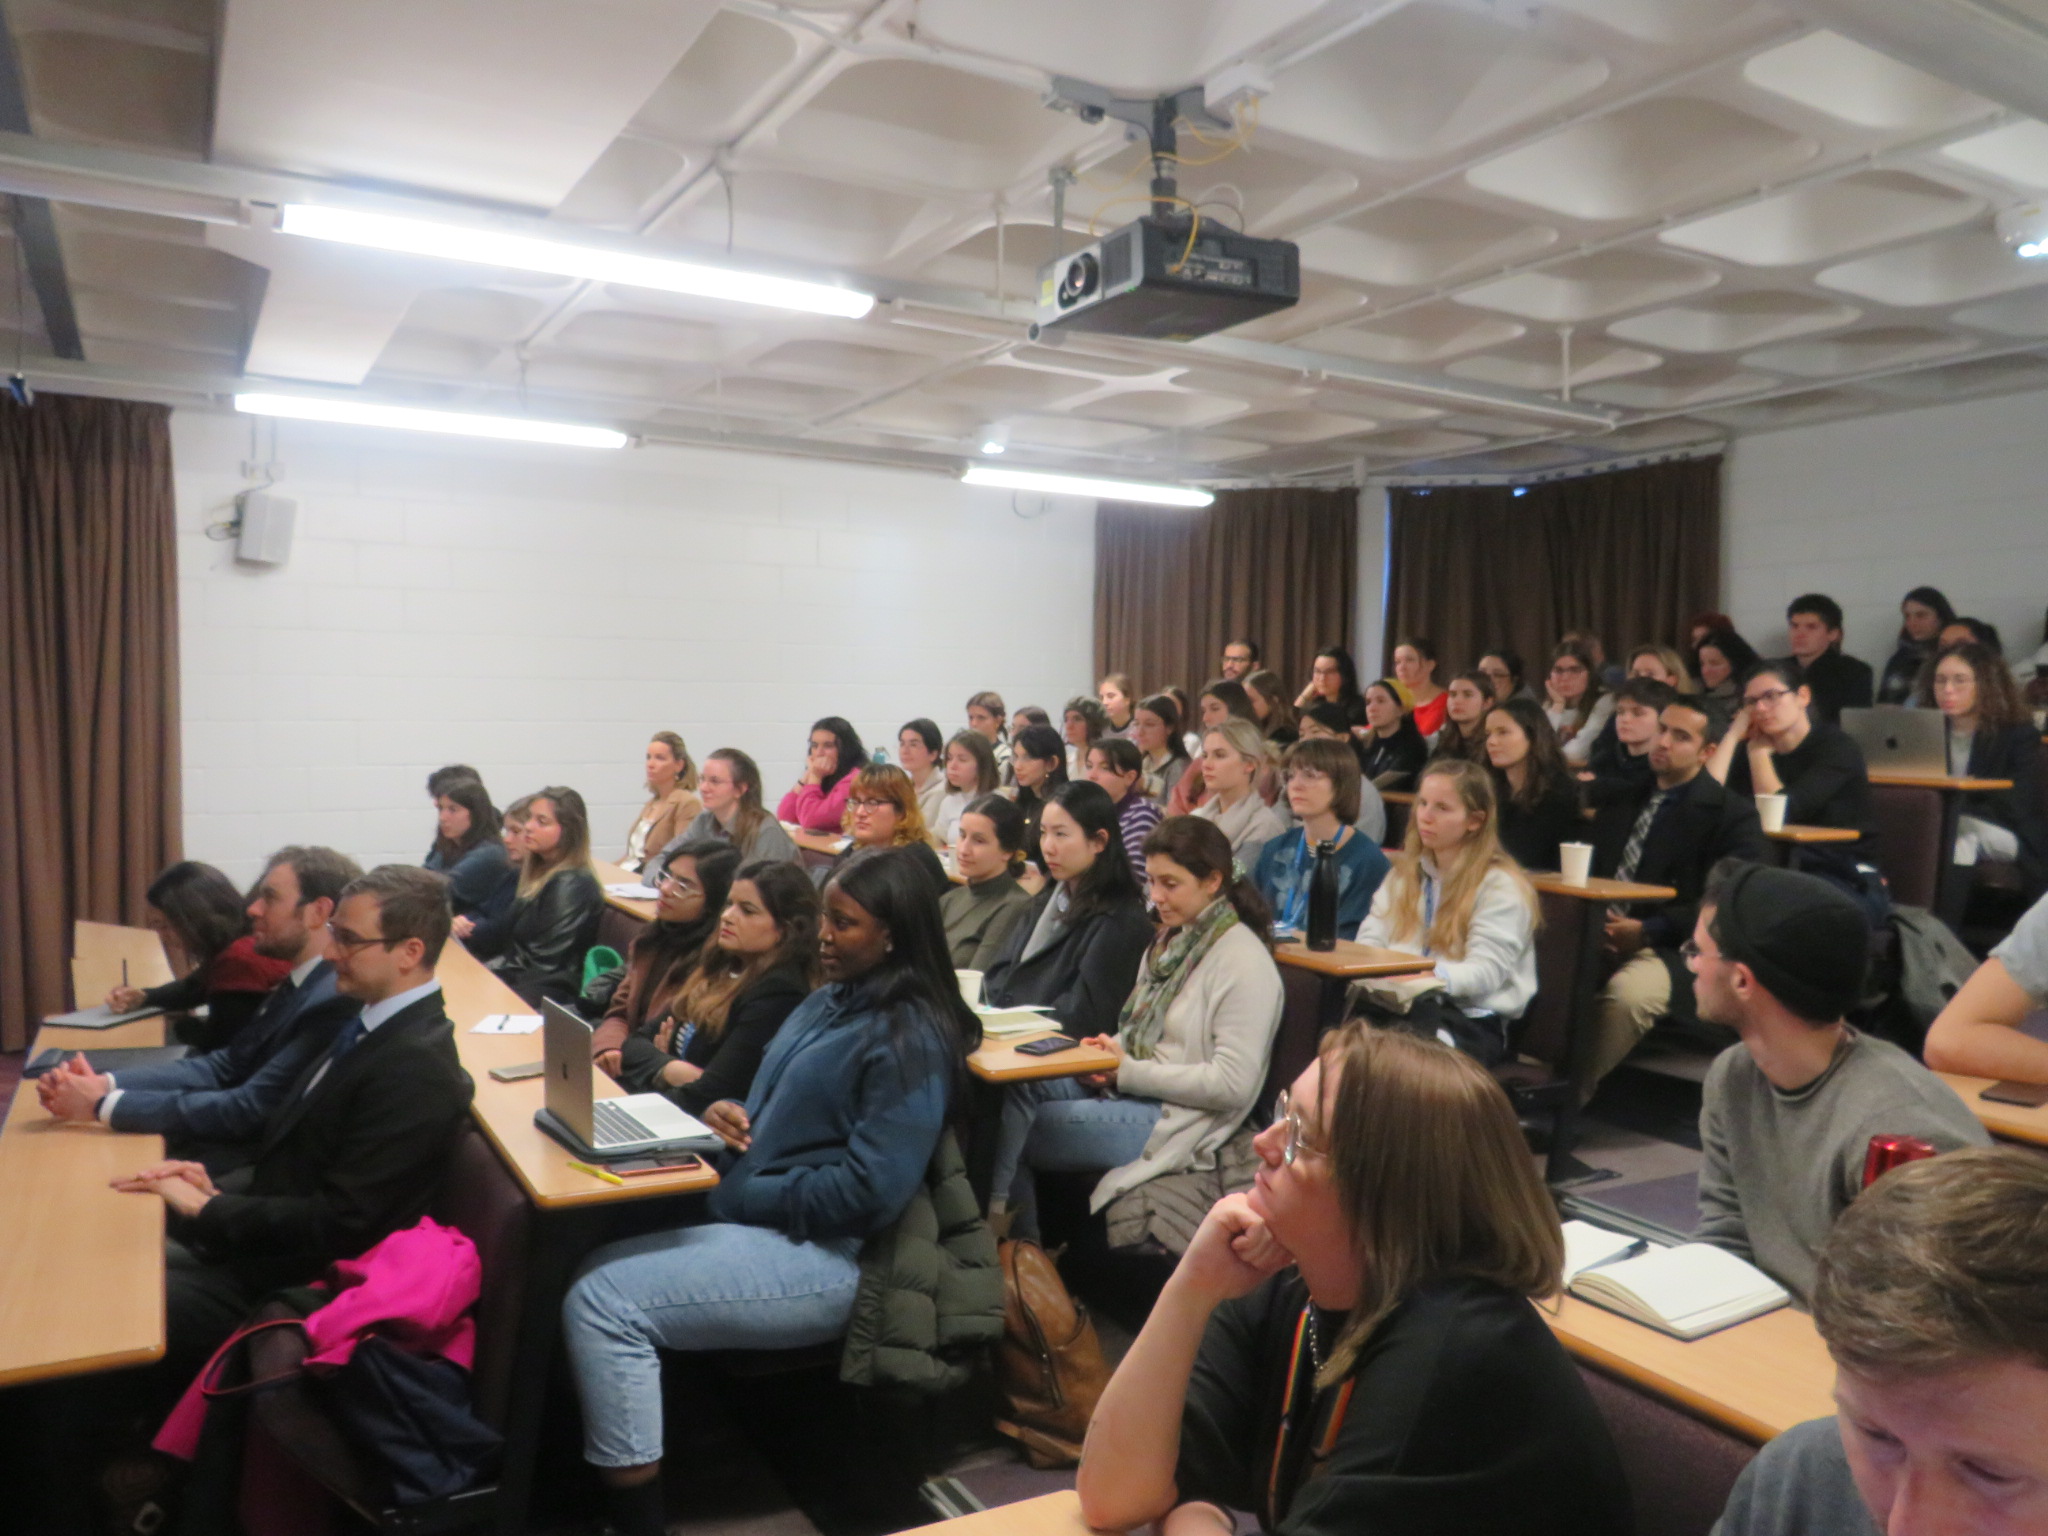 A lecture room full of students watching the lecture